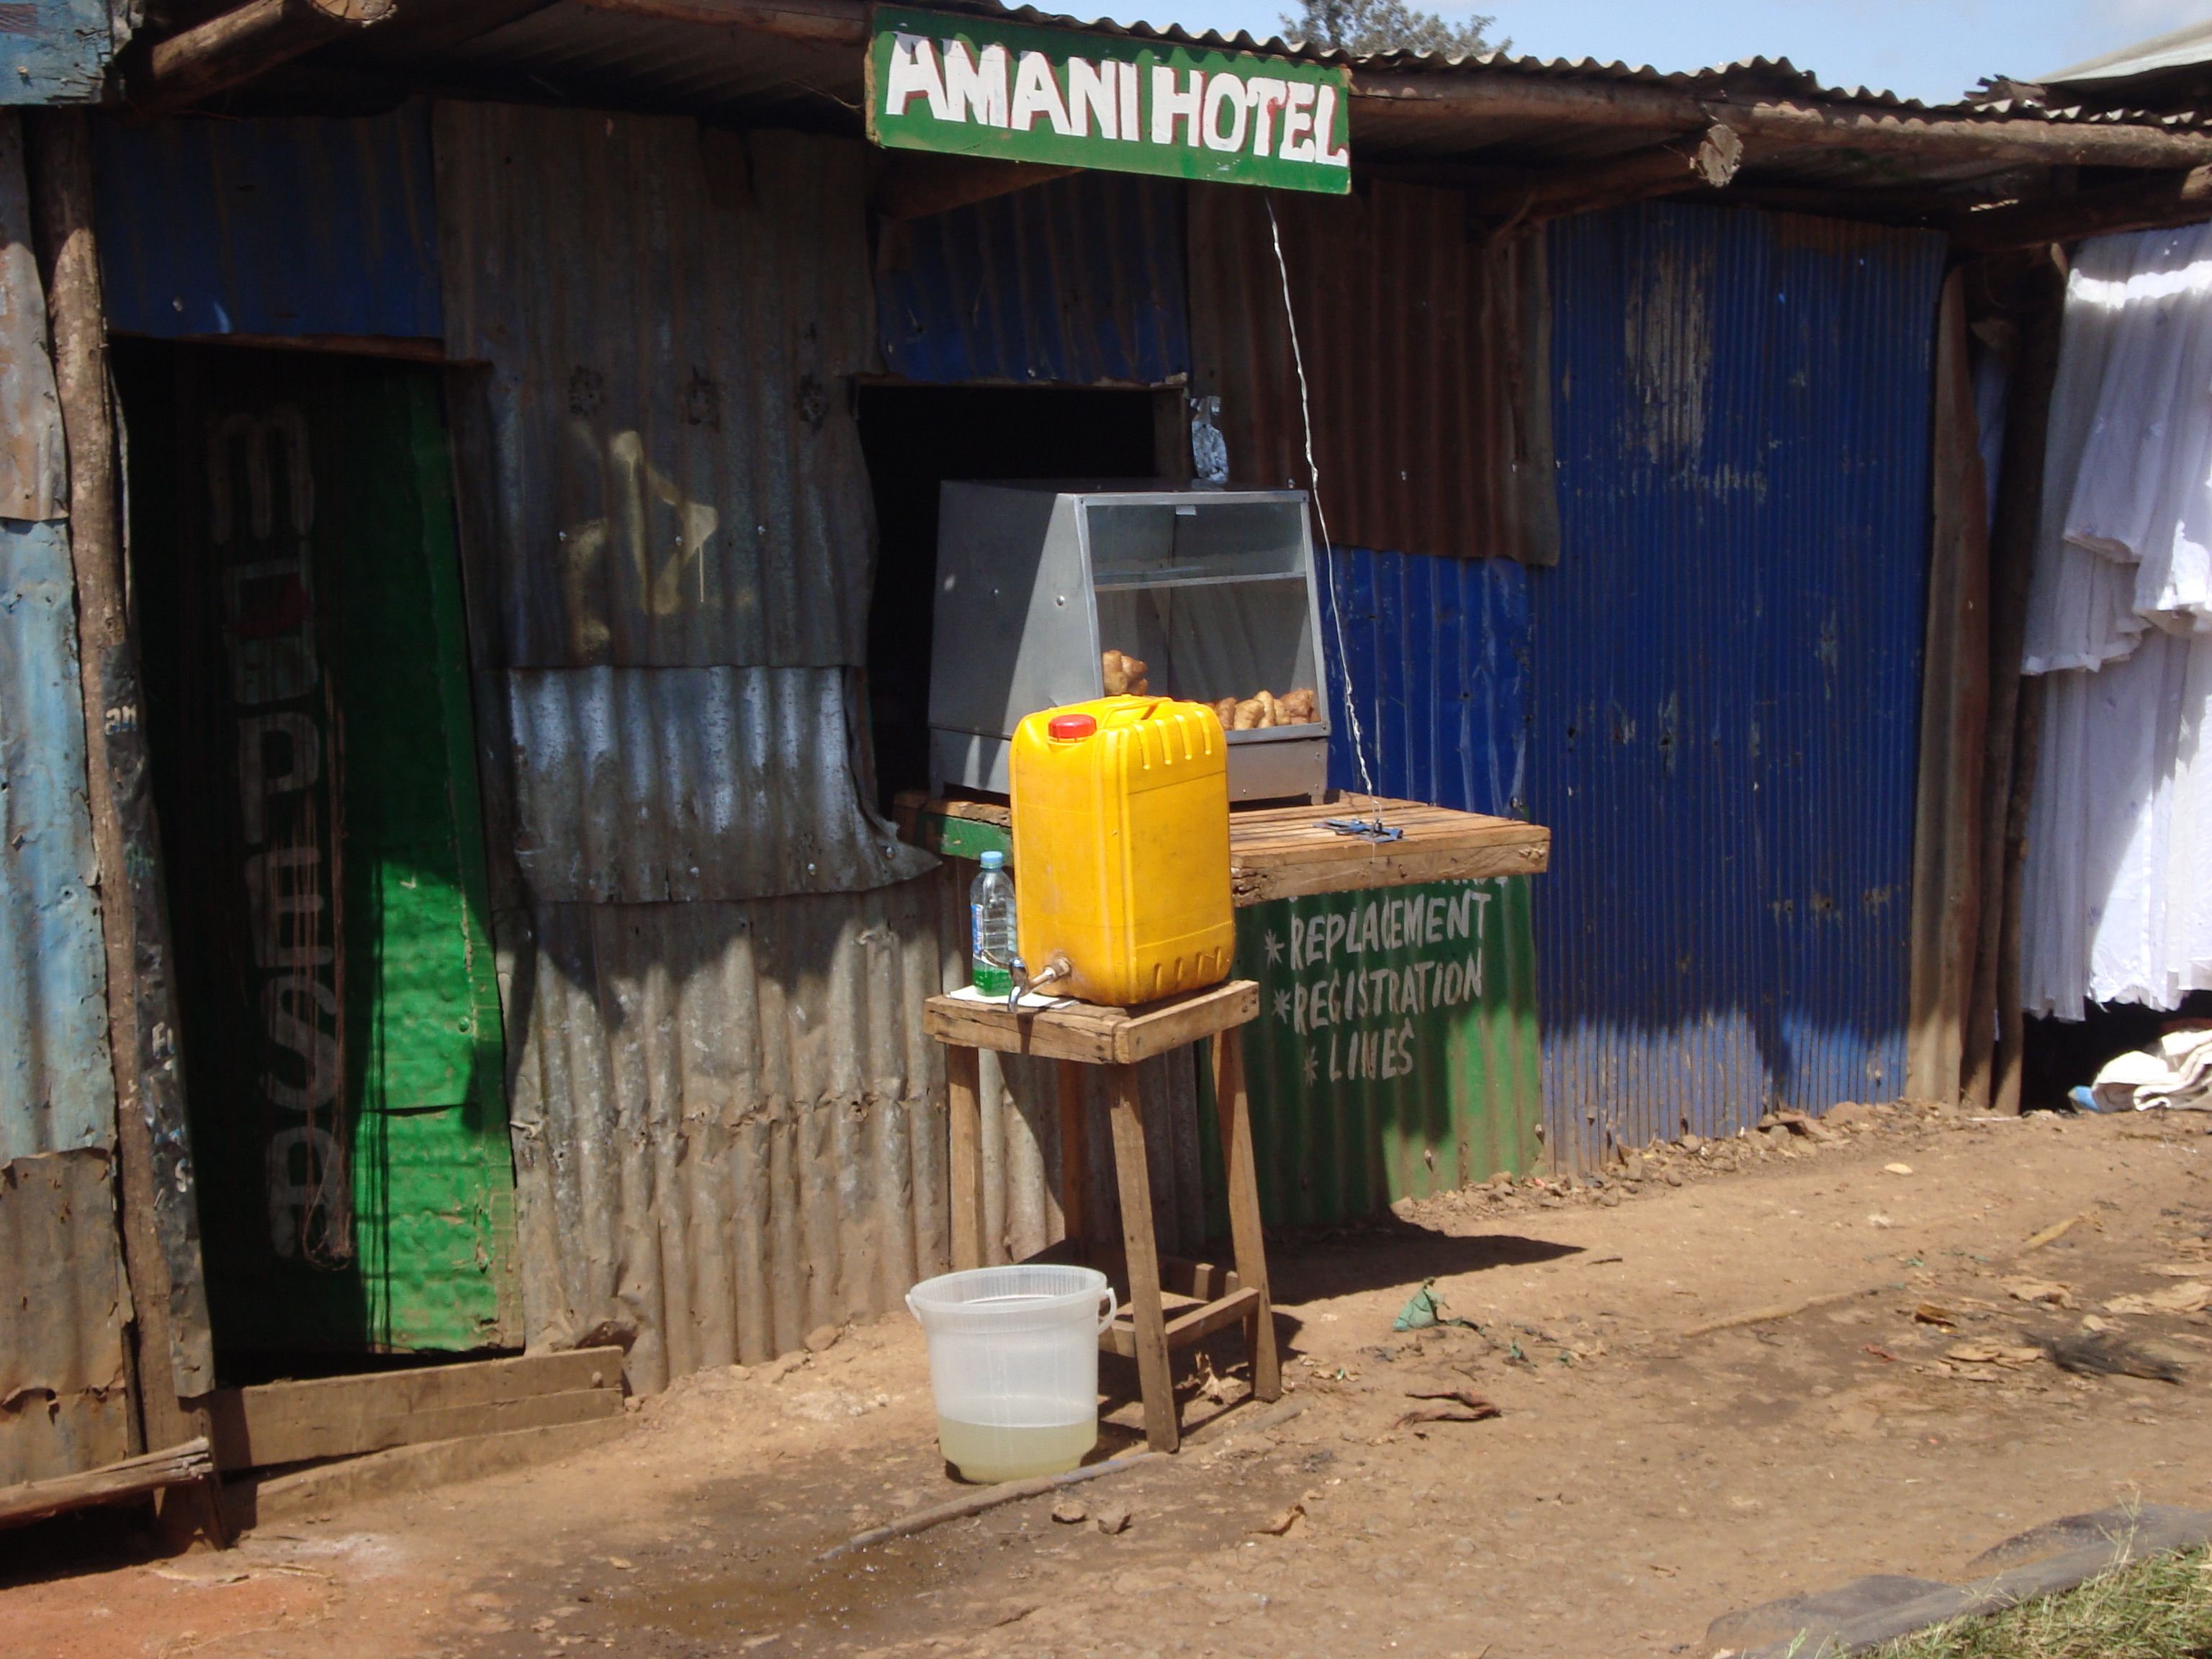 A self-made jerrycan tap for hand-washing at a small eatery in Kiera. Image by Henry Owino. Kenya, 2020.